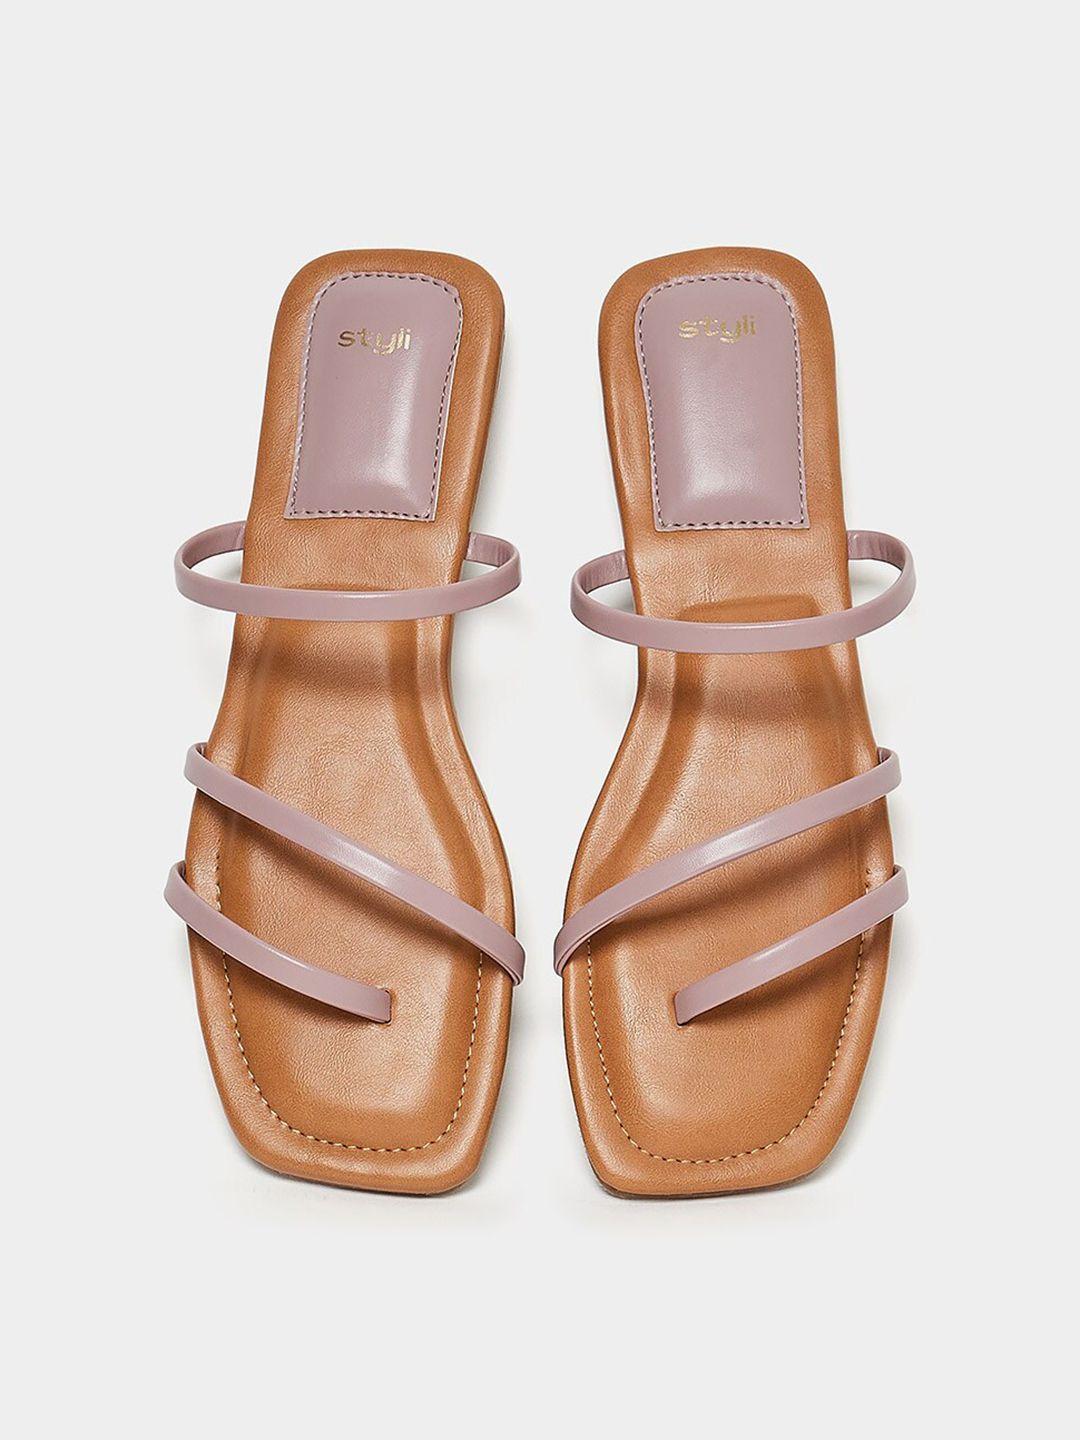 styli lavender & tan brown strappy one toe flats